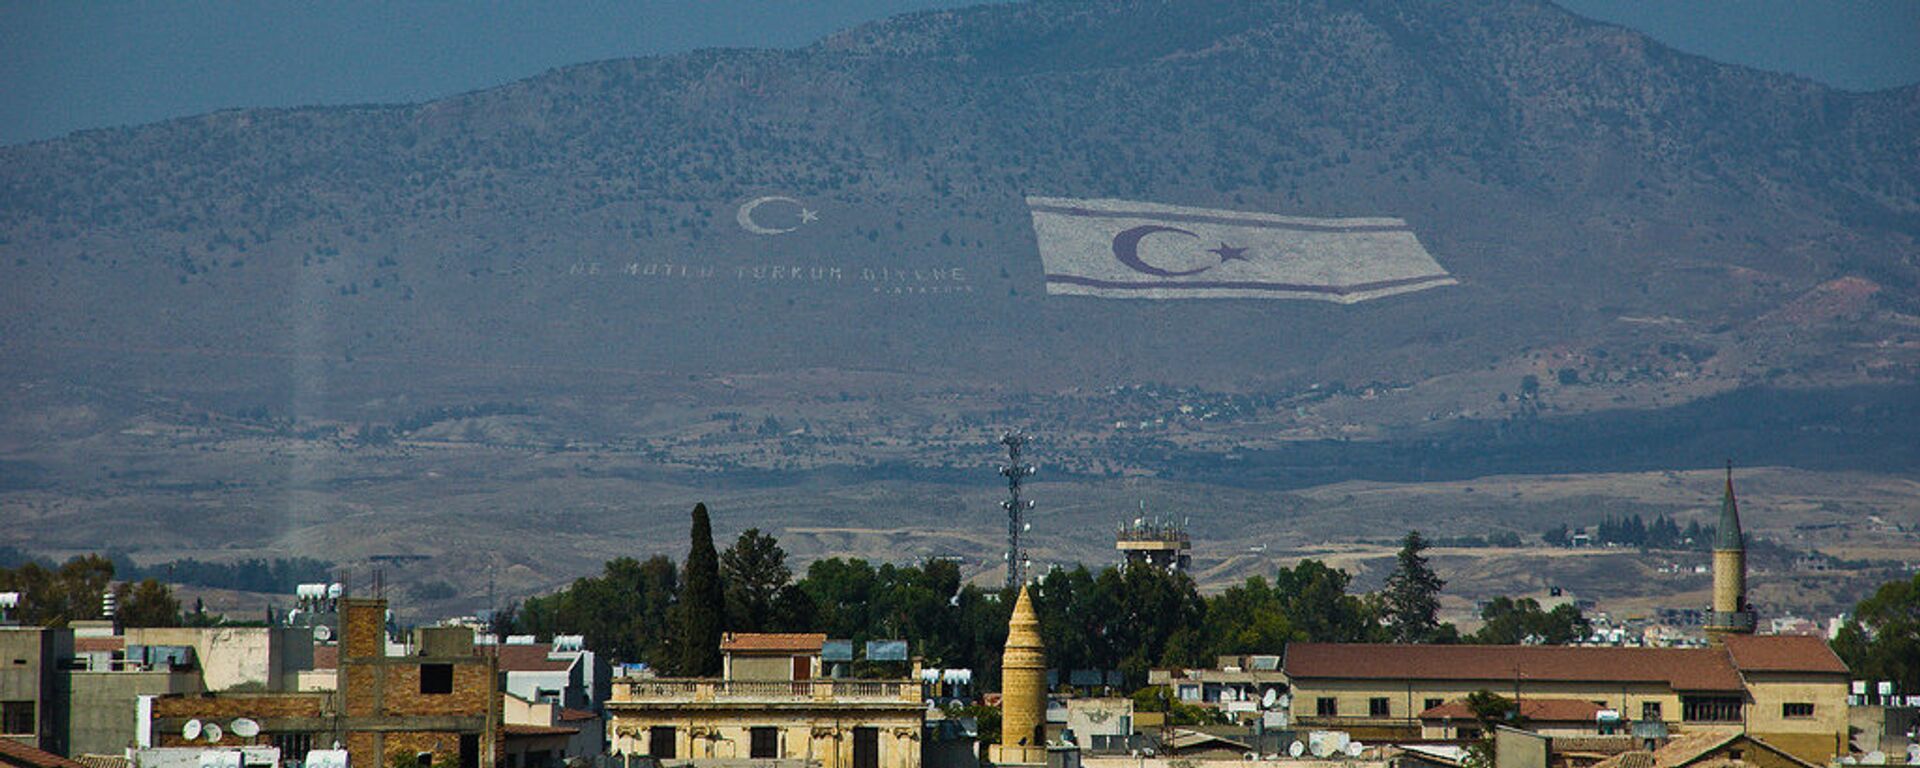 Flag of the self-declared Turkish Republic of Northern Cyprus in the hills above Cyprus' capital Nicosia. - Sputnik International, 1920, 21.07.2021